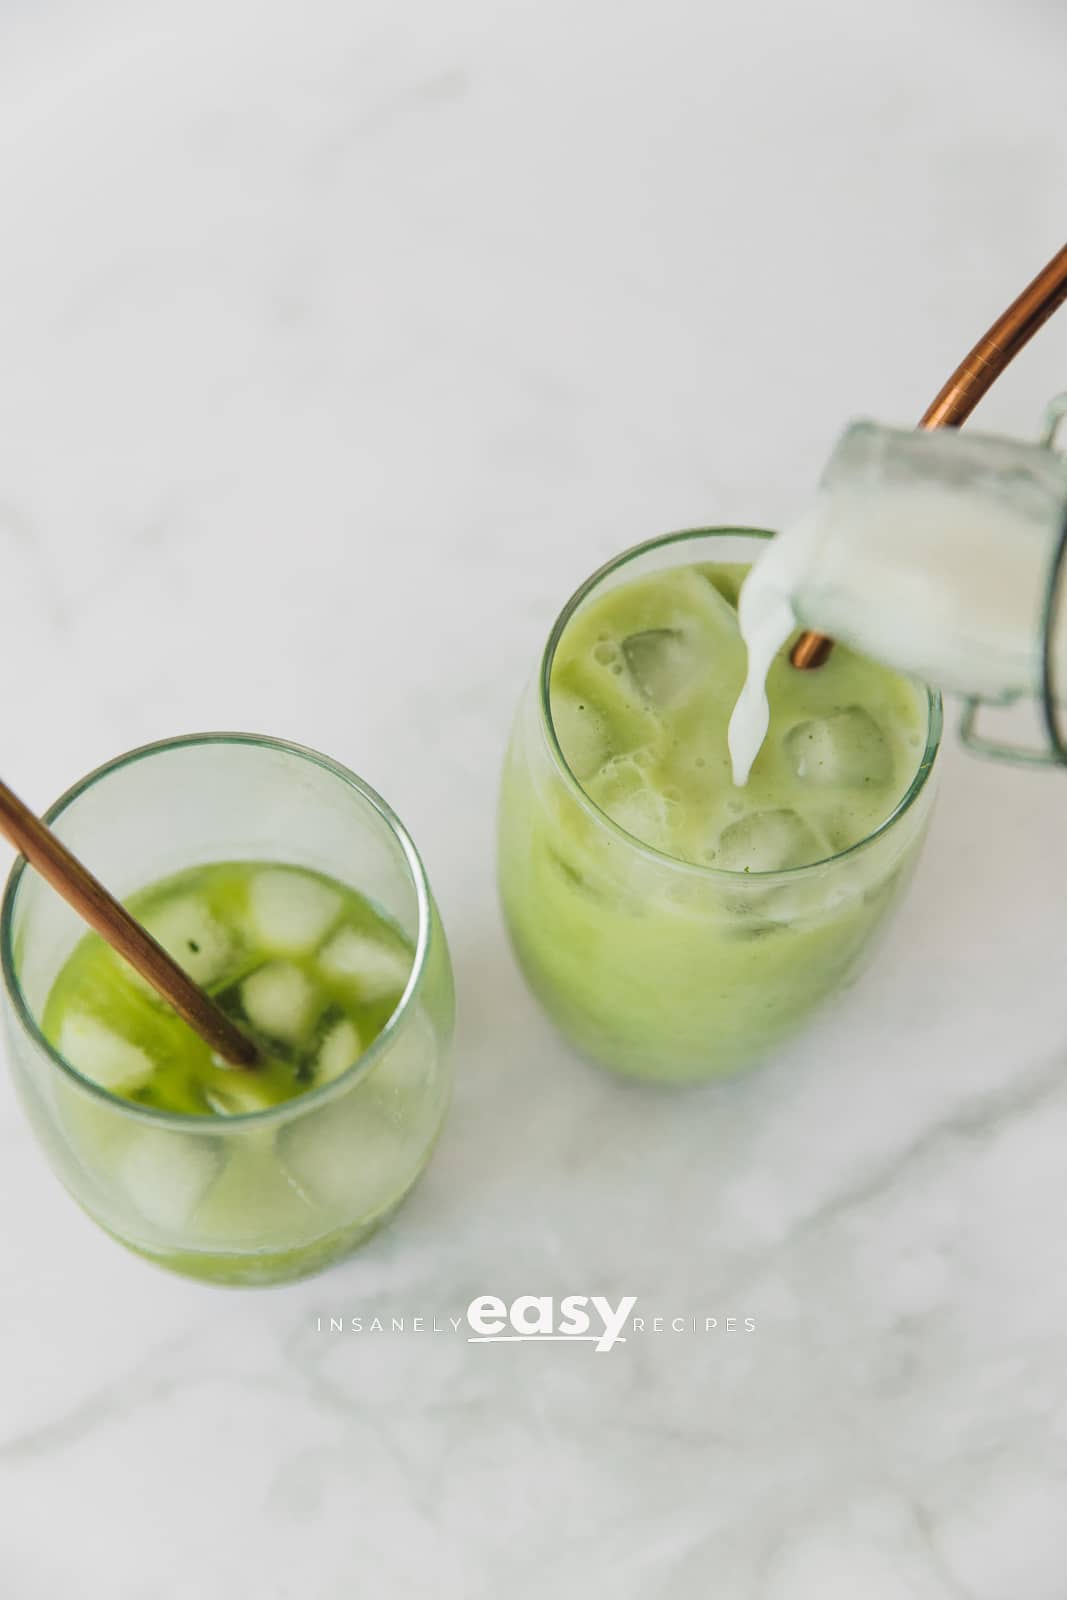 Top view photo of coconut milk being poured into a glass with ice and matcha. The glasses have metal straws. 